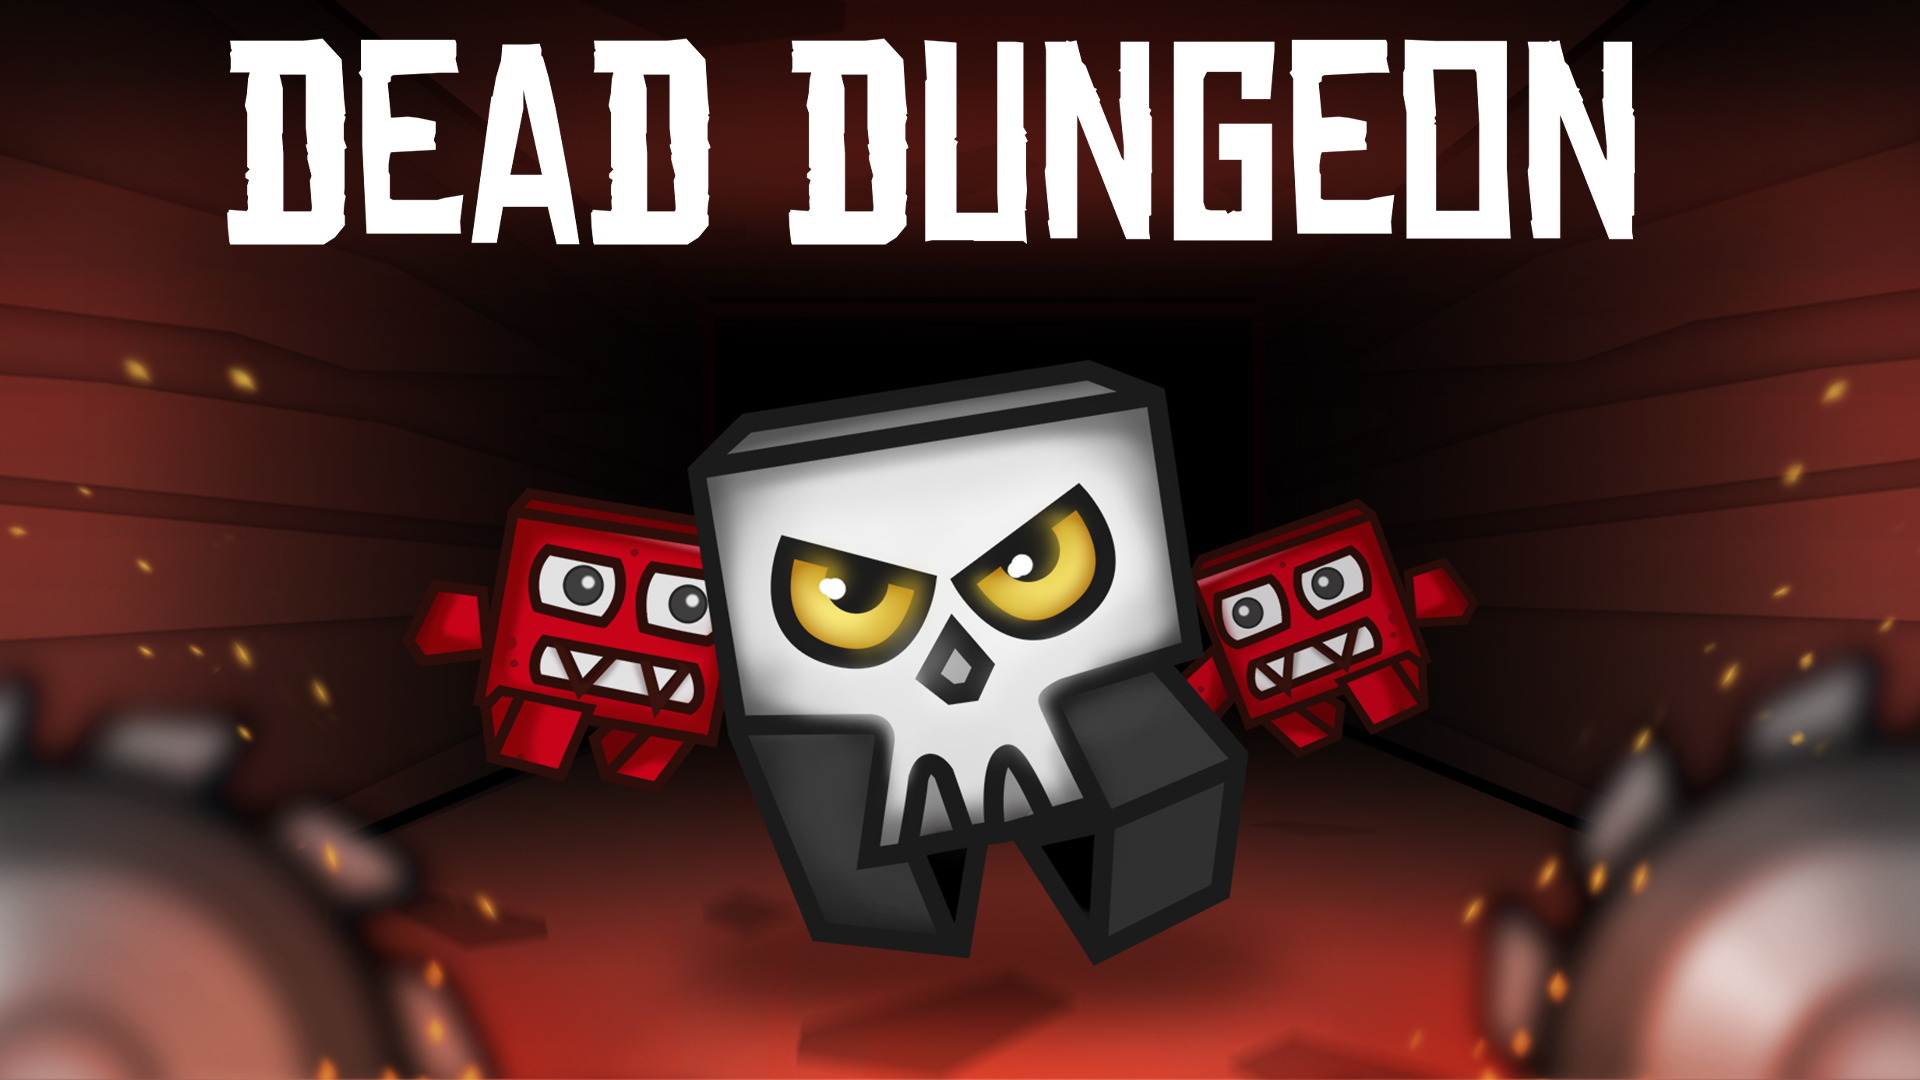 Icon for Dungeon in Dungeon